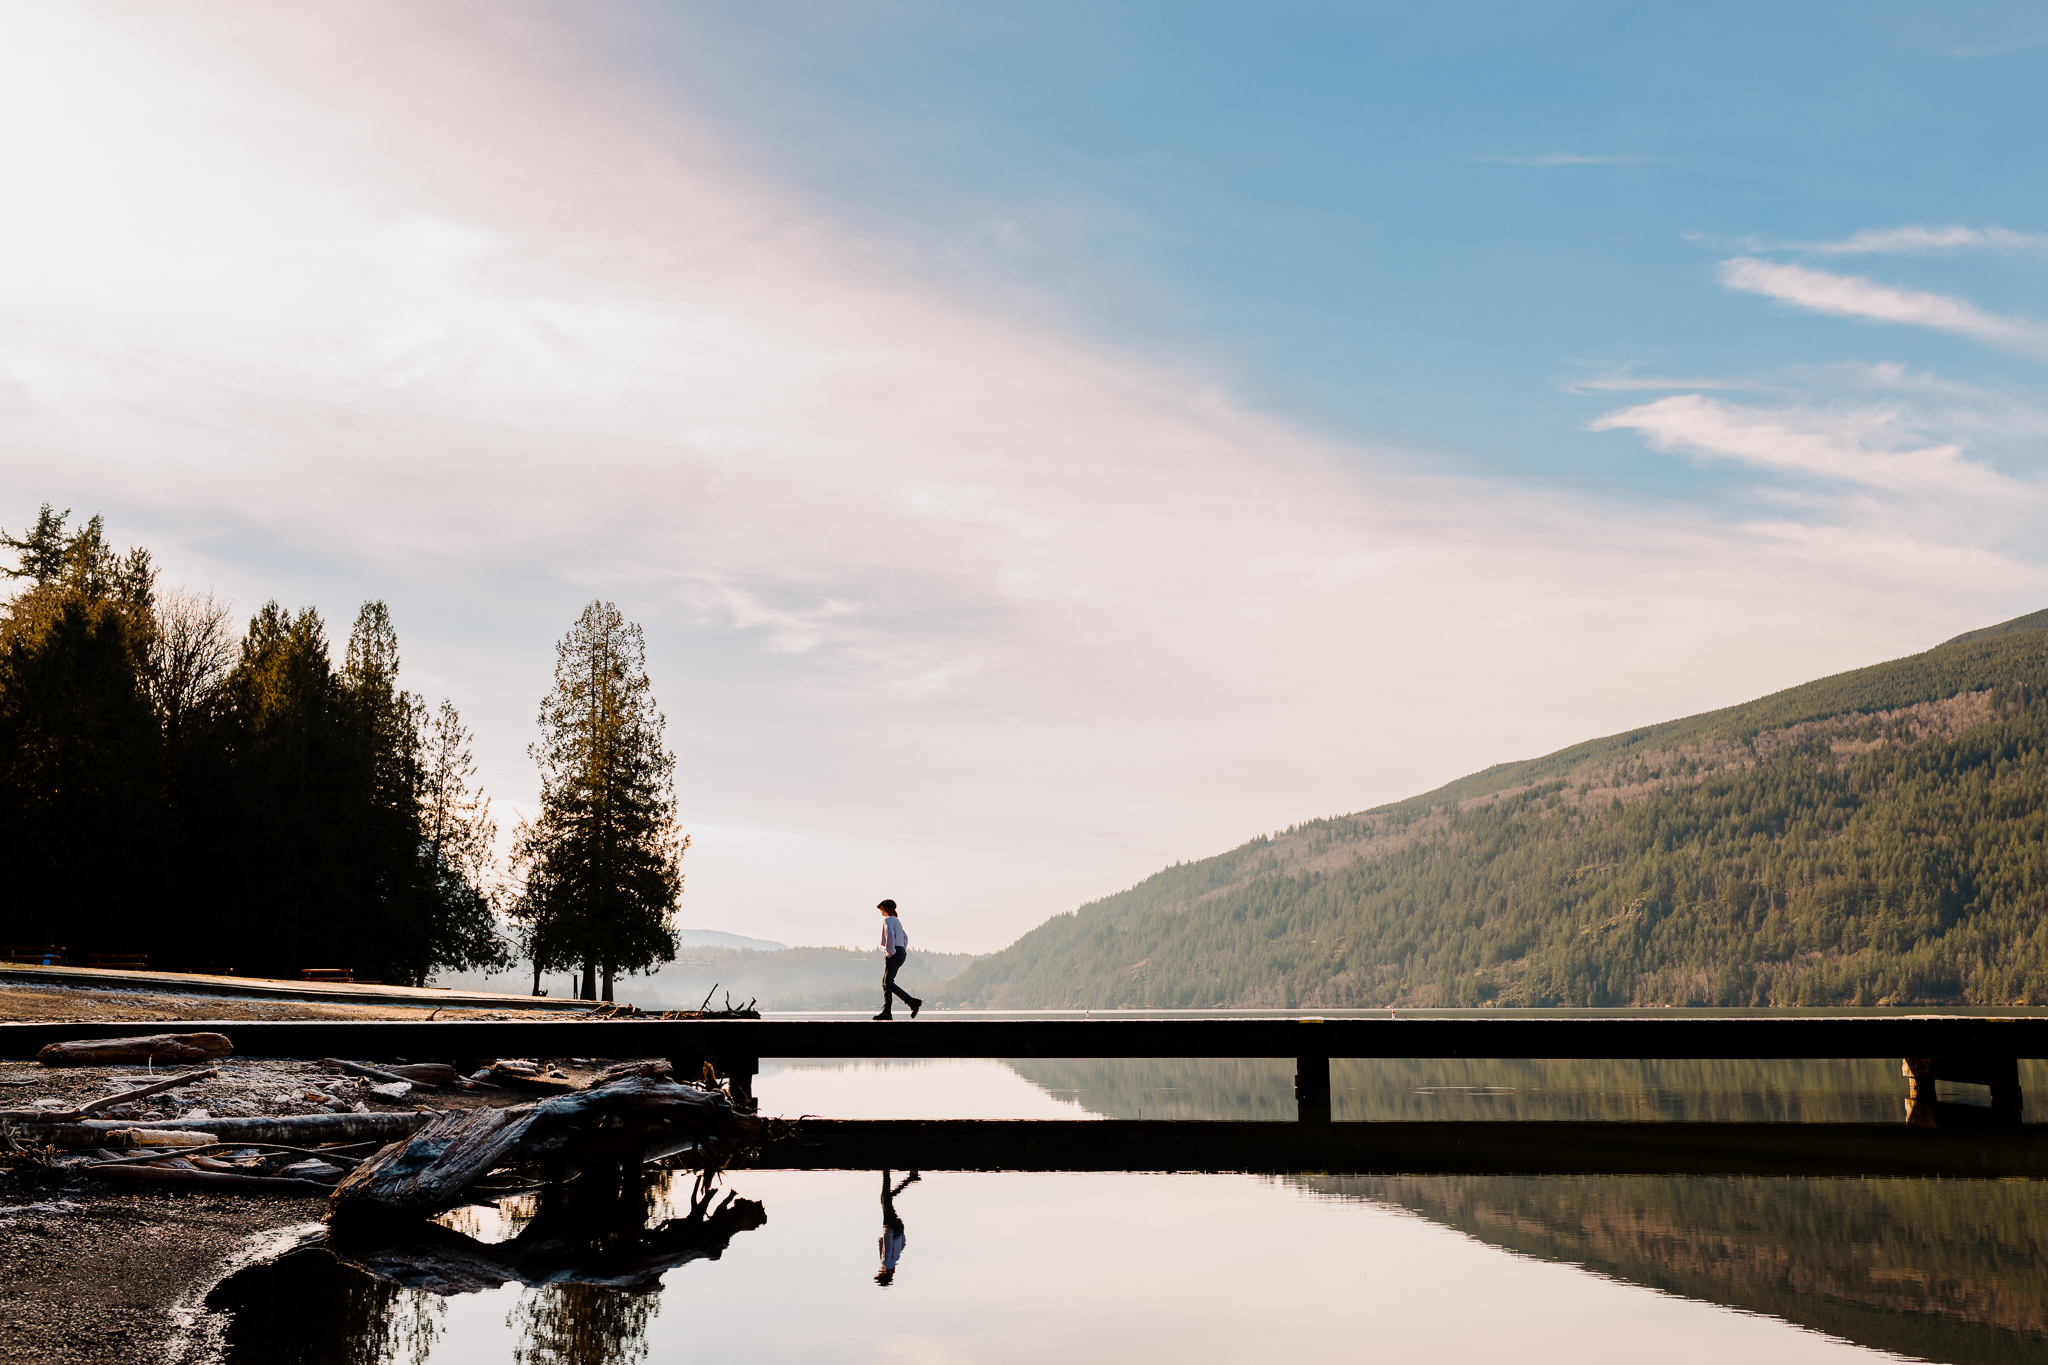 How to enhance your images with framing - boy on bridge in mountains